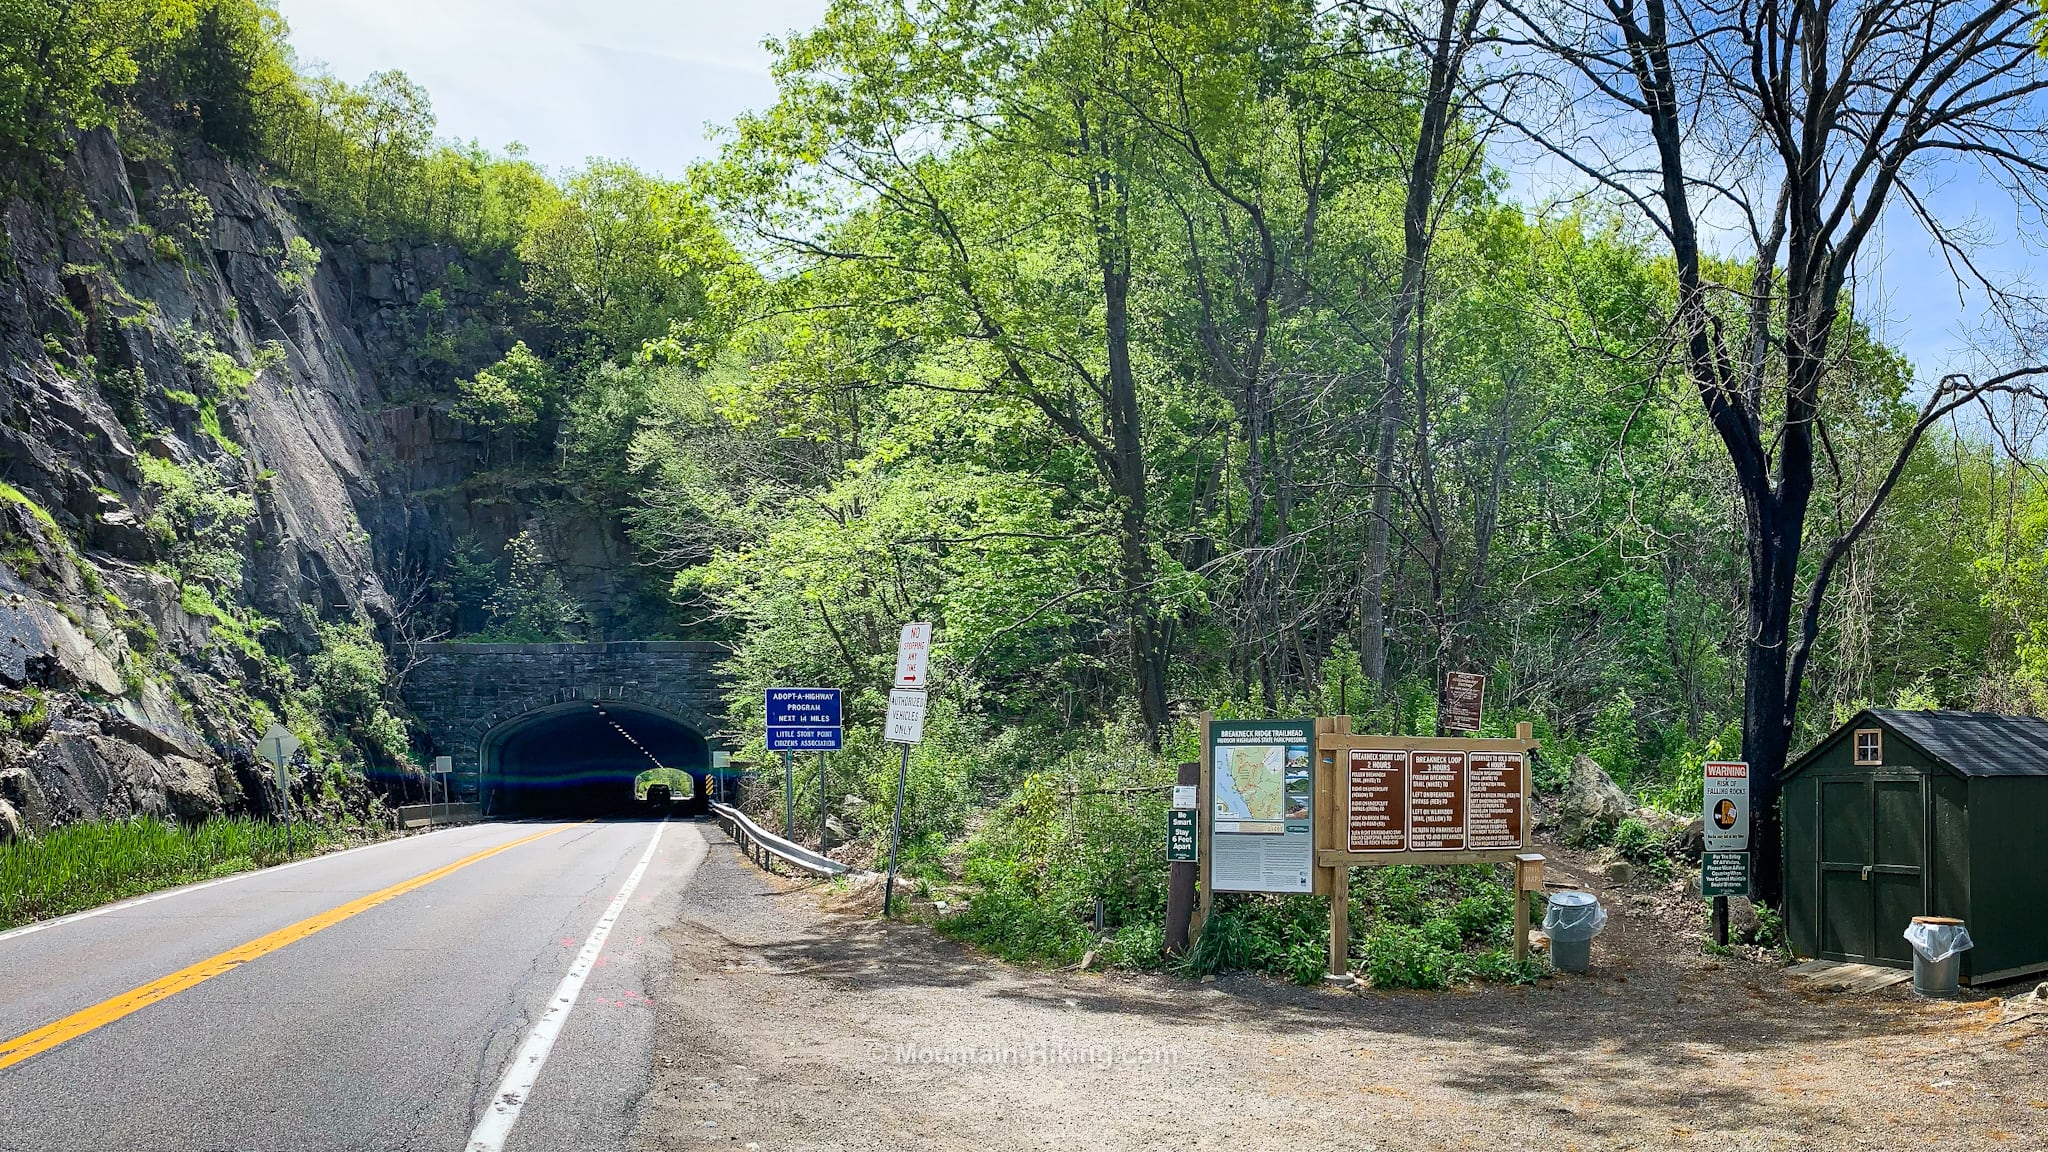 Breakneck Ridge trailhead next to road and tunnel